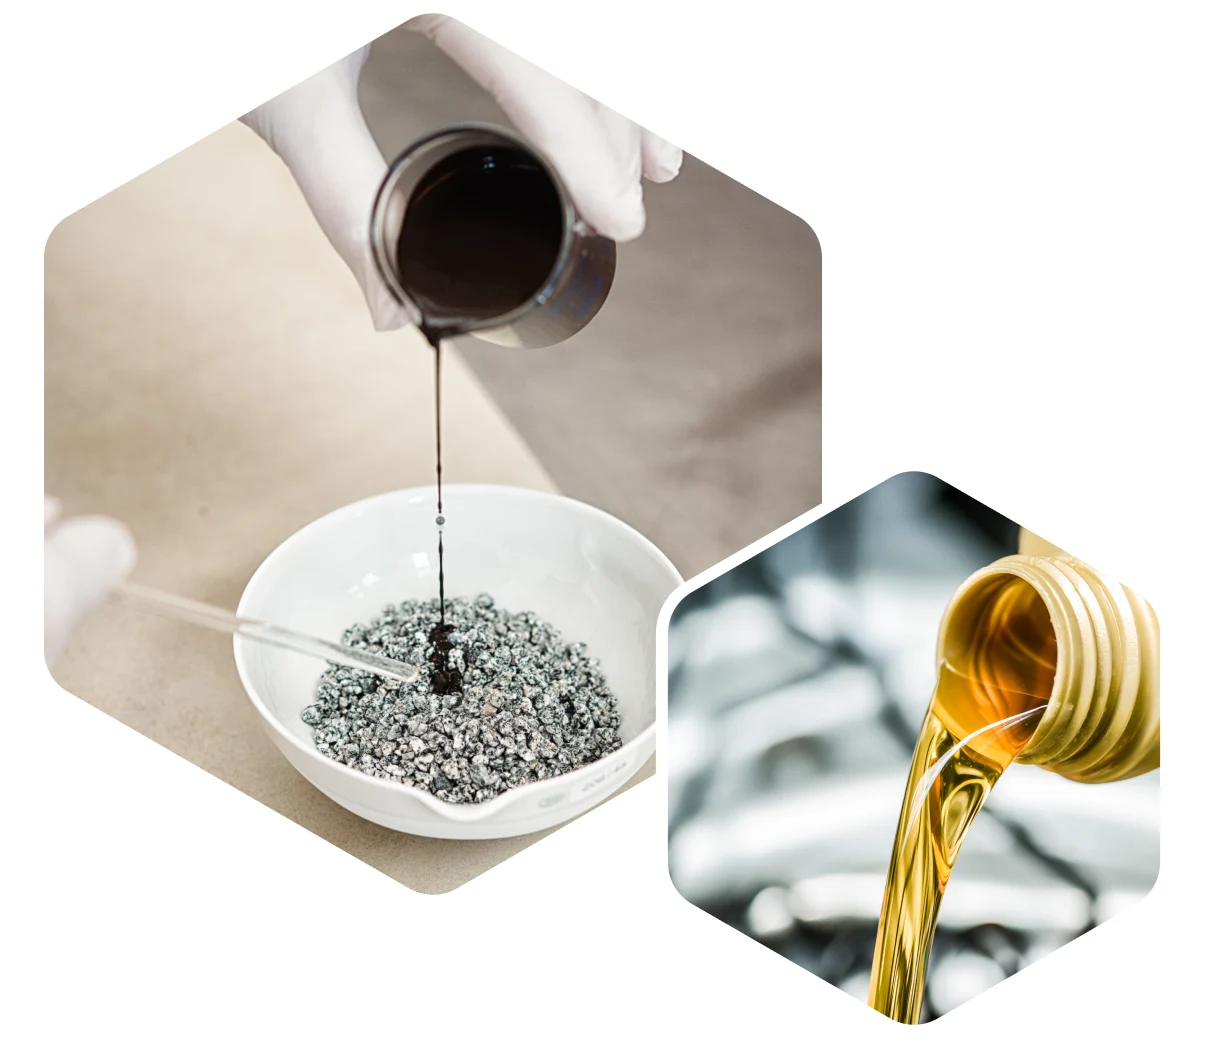 On the left, a black liquid is being poured onto silver shavings. On the right, oil pours out of a spout.